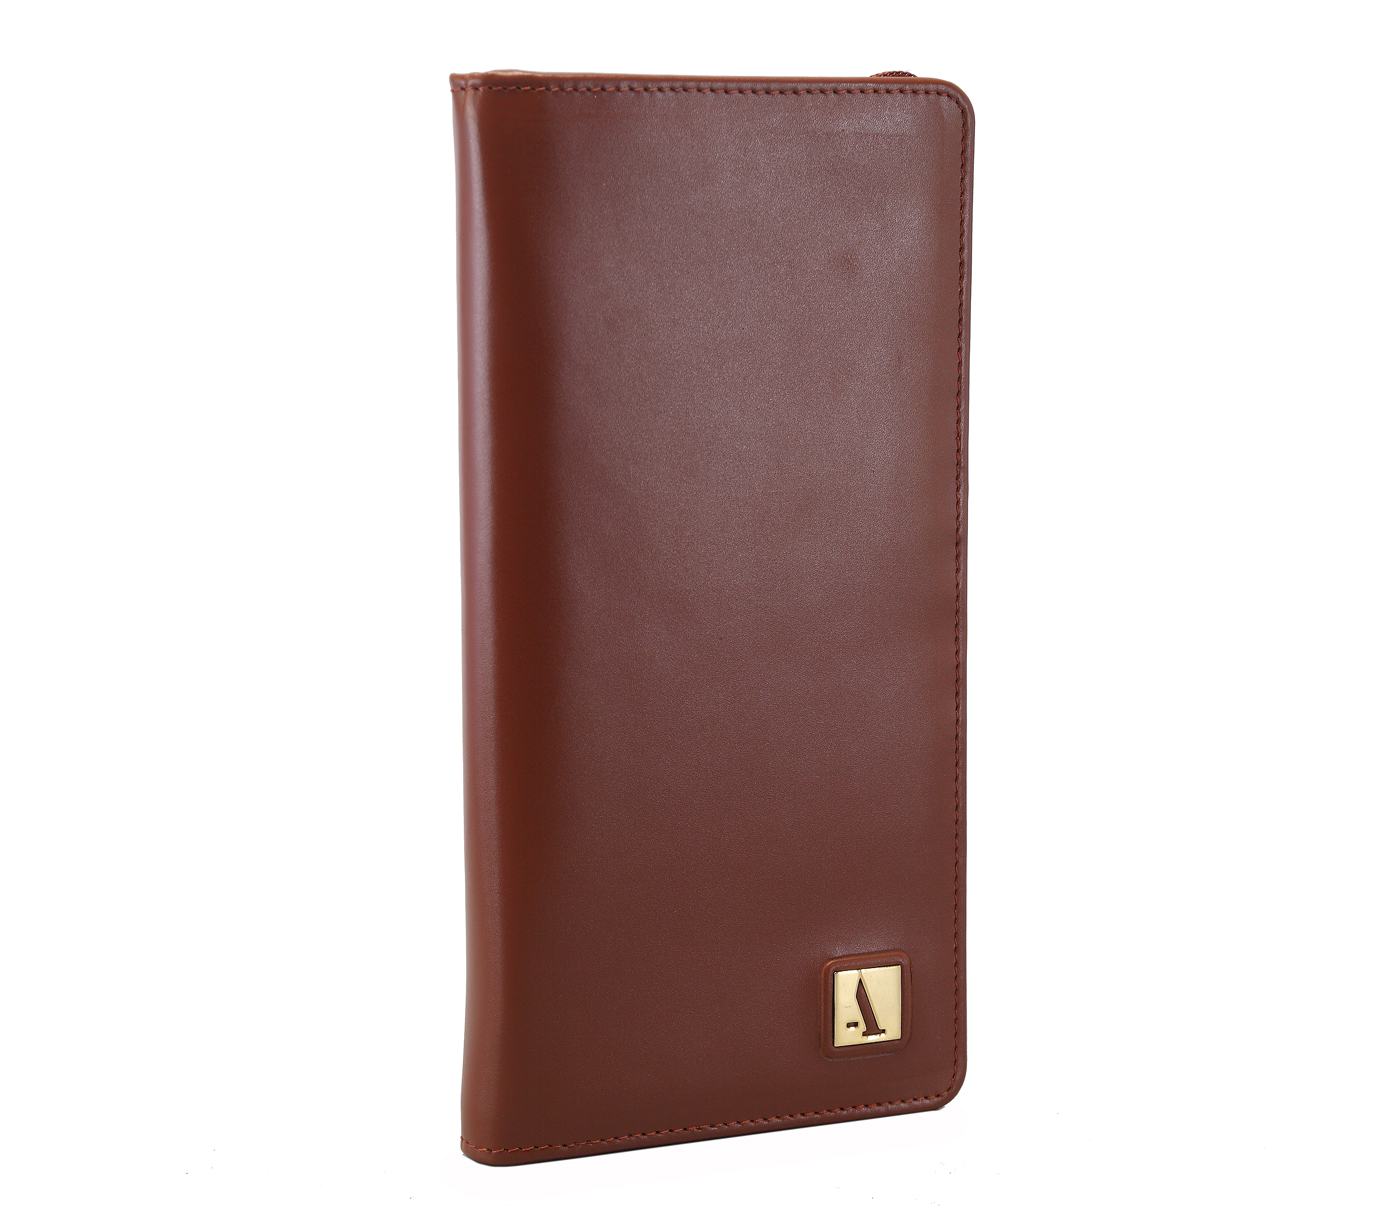 Wallet-Pablo-Travel document wallet in Genuine Leather - Tan